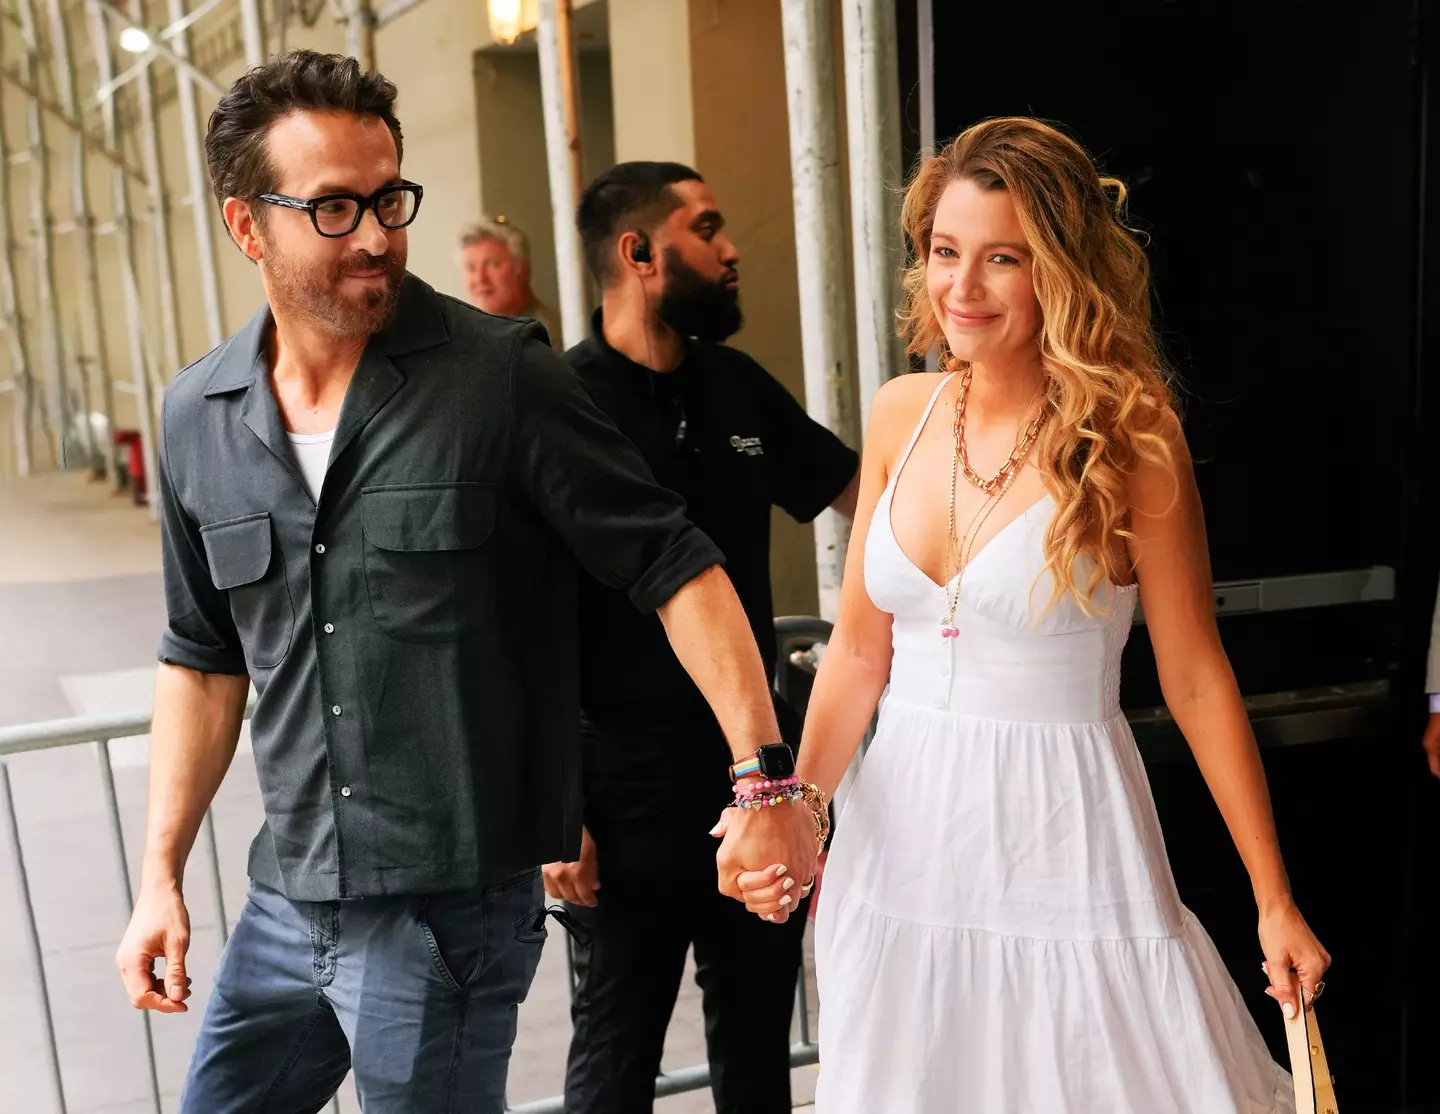 Blake Lively opened up on the secret 'rule' to a happy marriage.